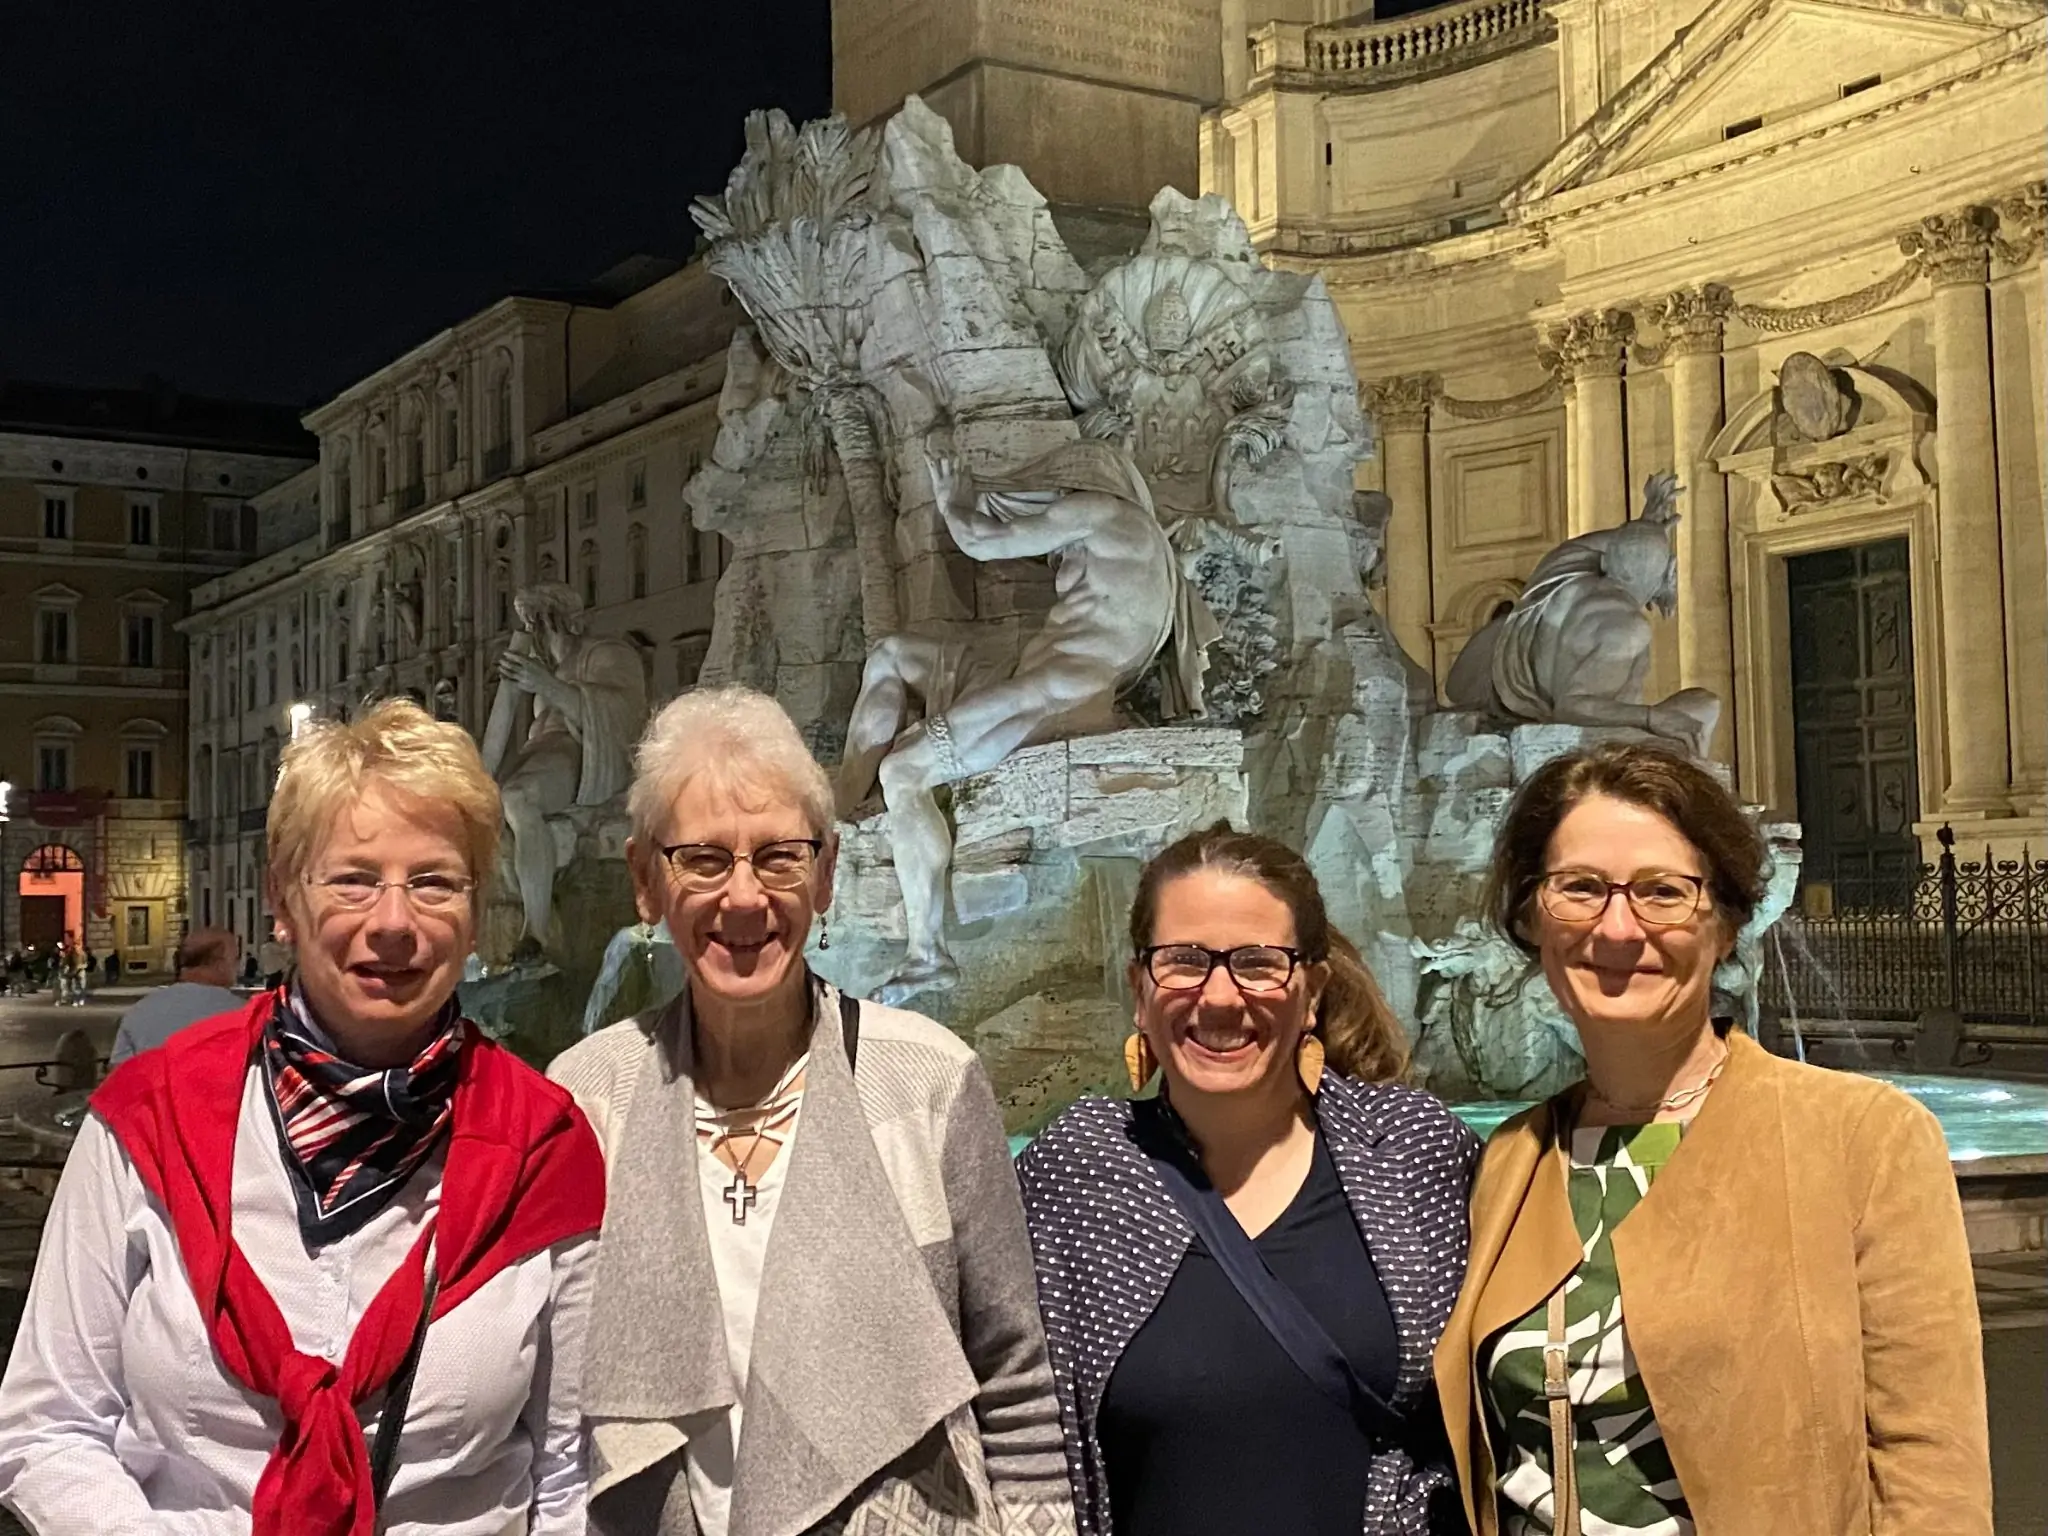 Members of ARCIC-III enjoying an evening stroll in the Piazza Navona in Rome. From left to right: Myriam Wijlens, Archbishop Linda Nicholls, Kristin Colberg, and Sigrid Müller. In the background, Bernini's <i>Fontana dei Quattro Fiumi</i> (Fountain of the Four Rivers, 1651) and the Church of Sant'Agnese in Agone